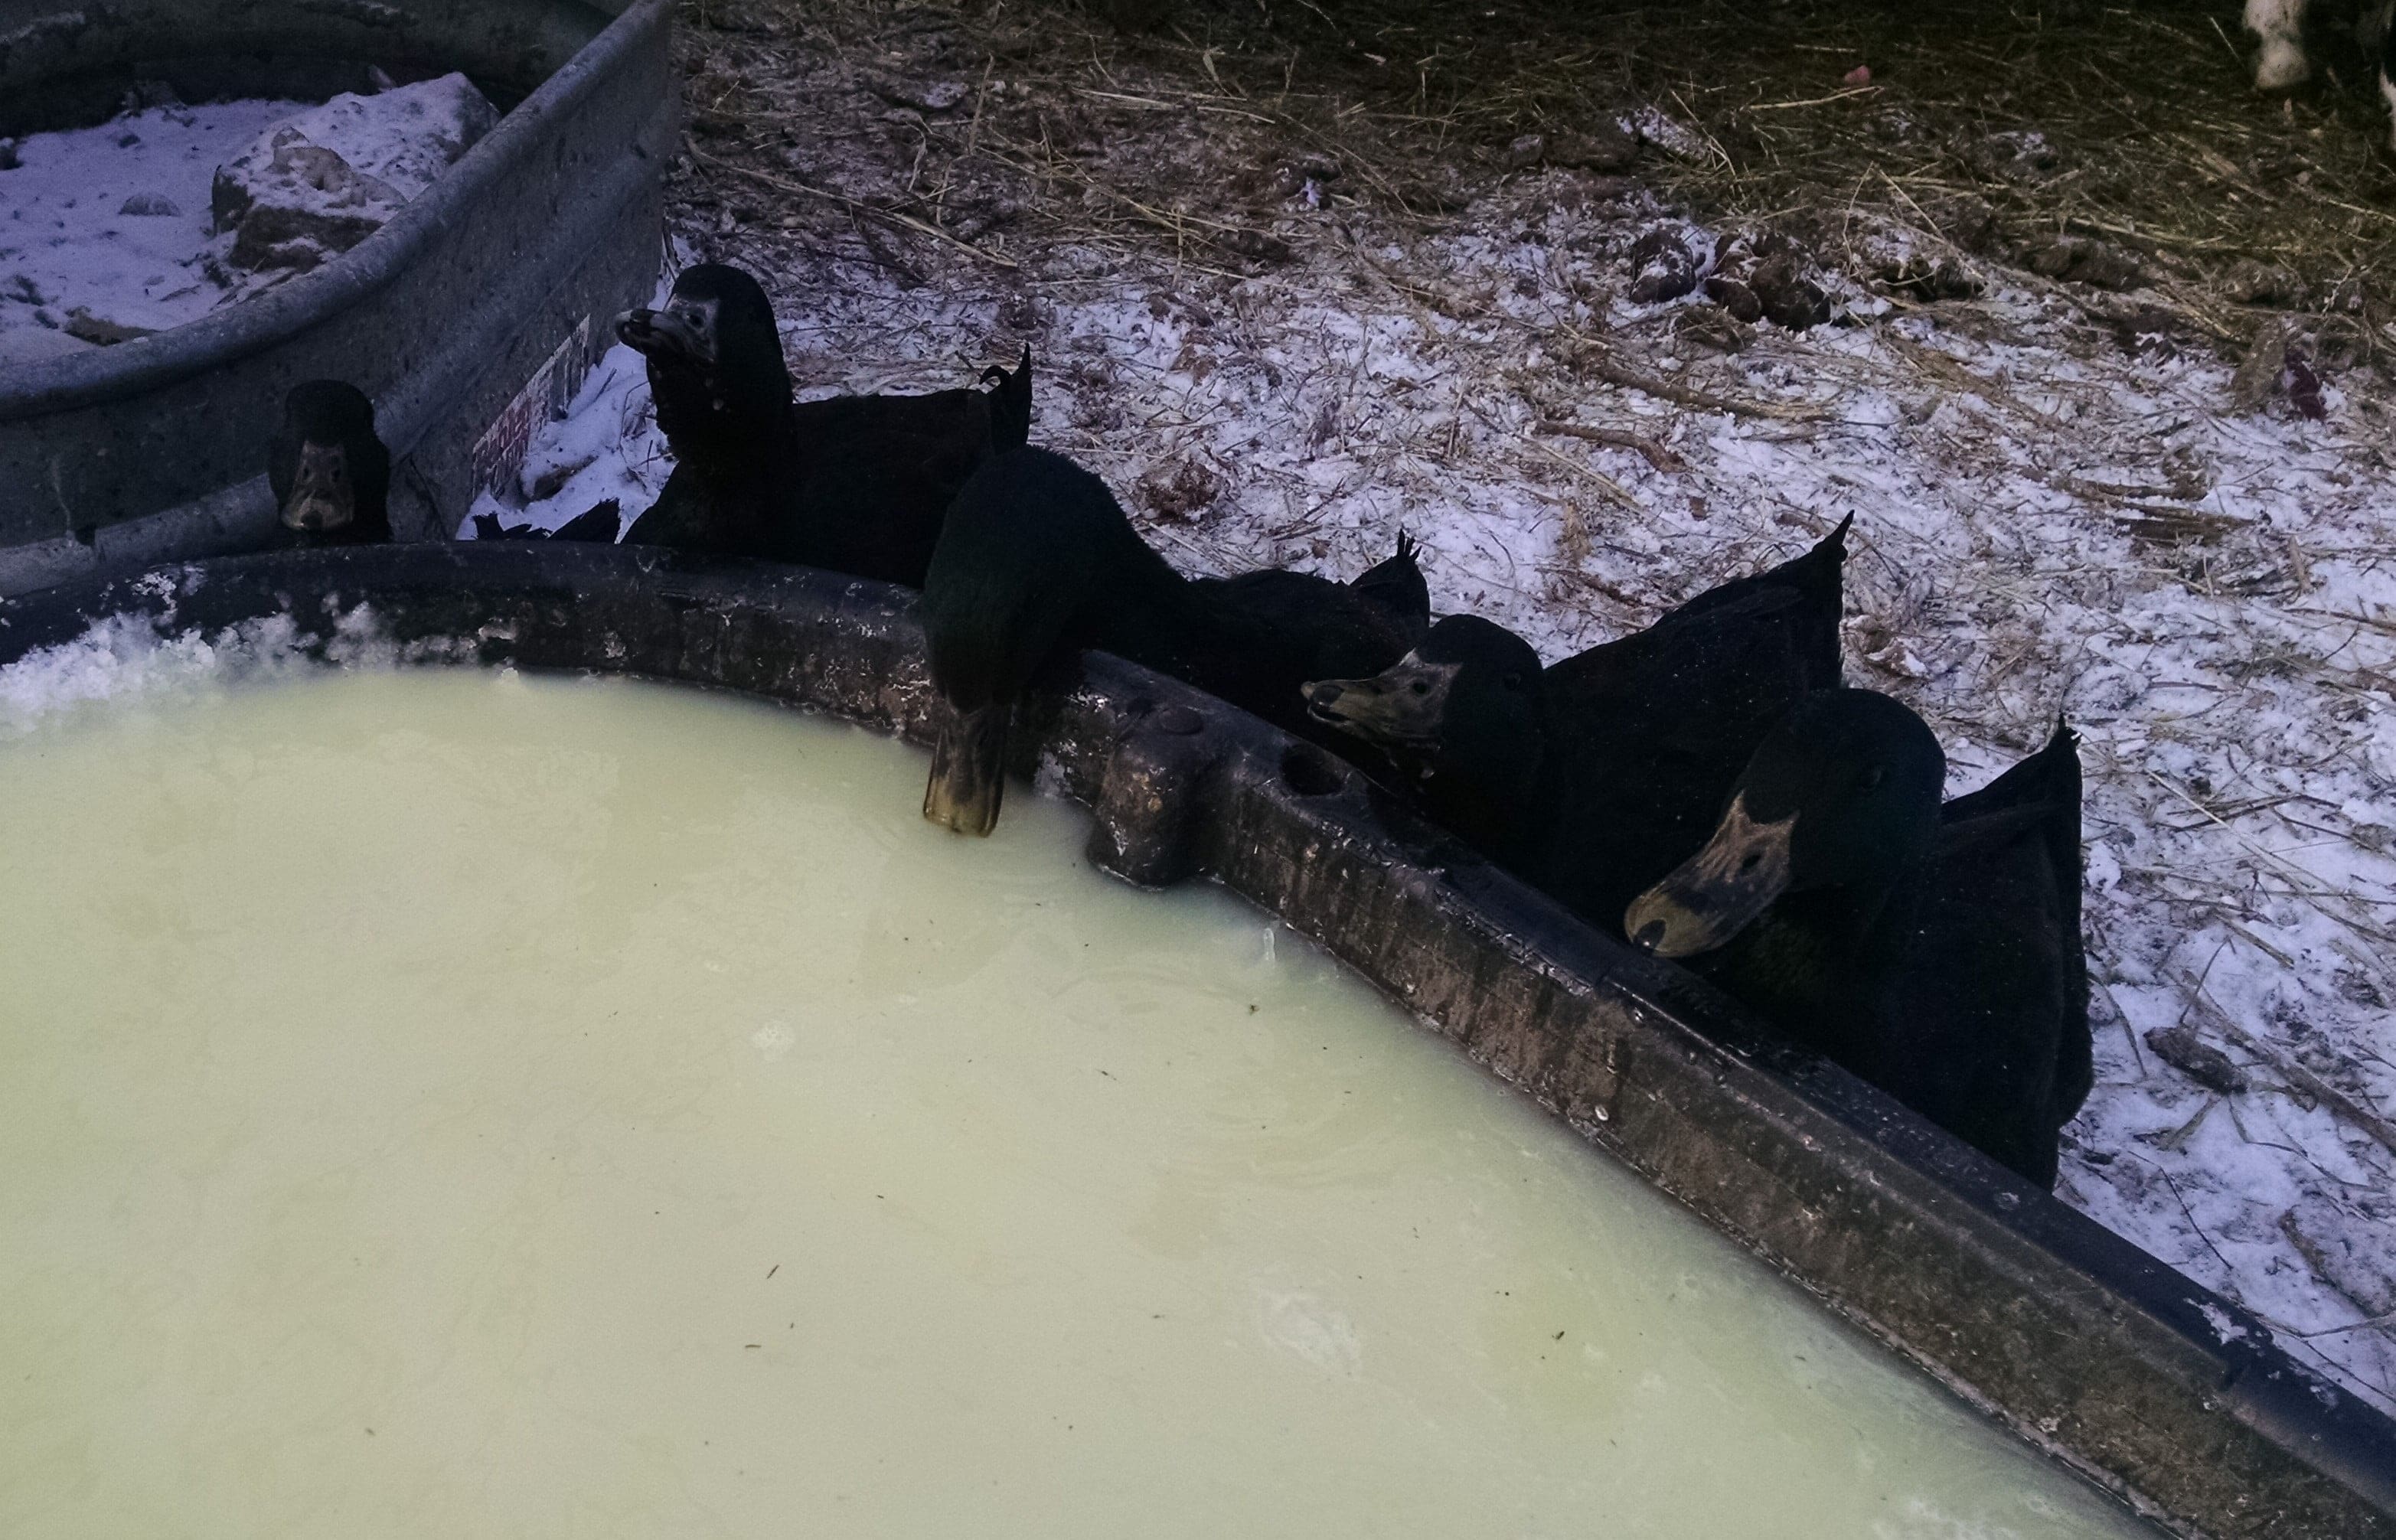 The Cayaga ducks are also pleased to be able to dibble their beaks in the whey.